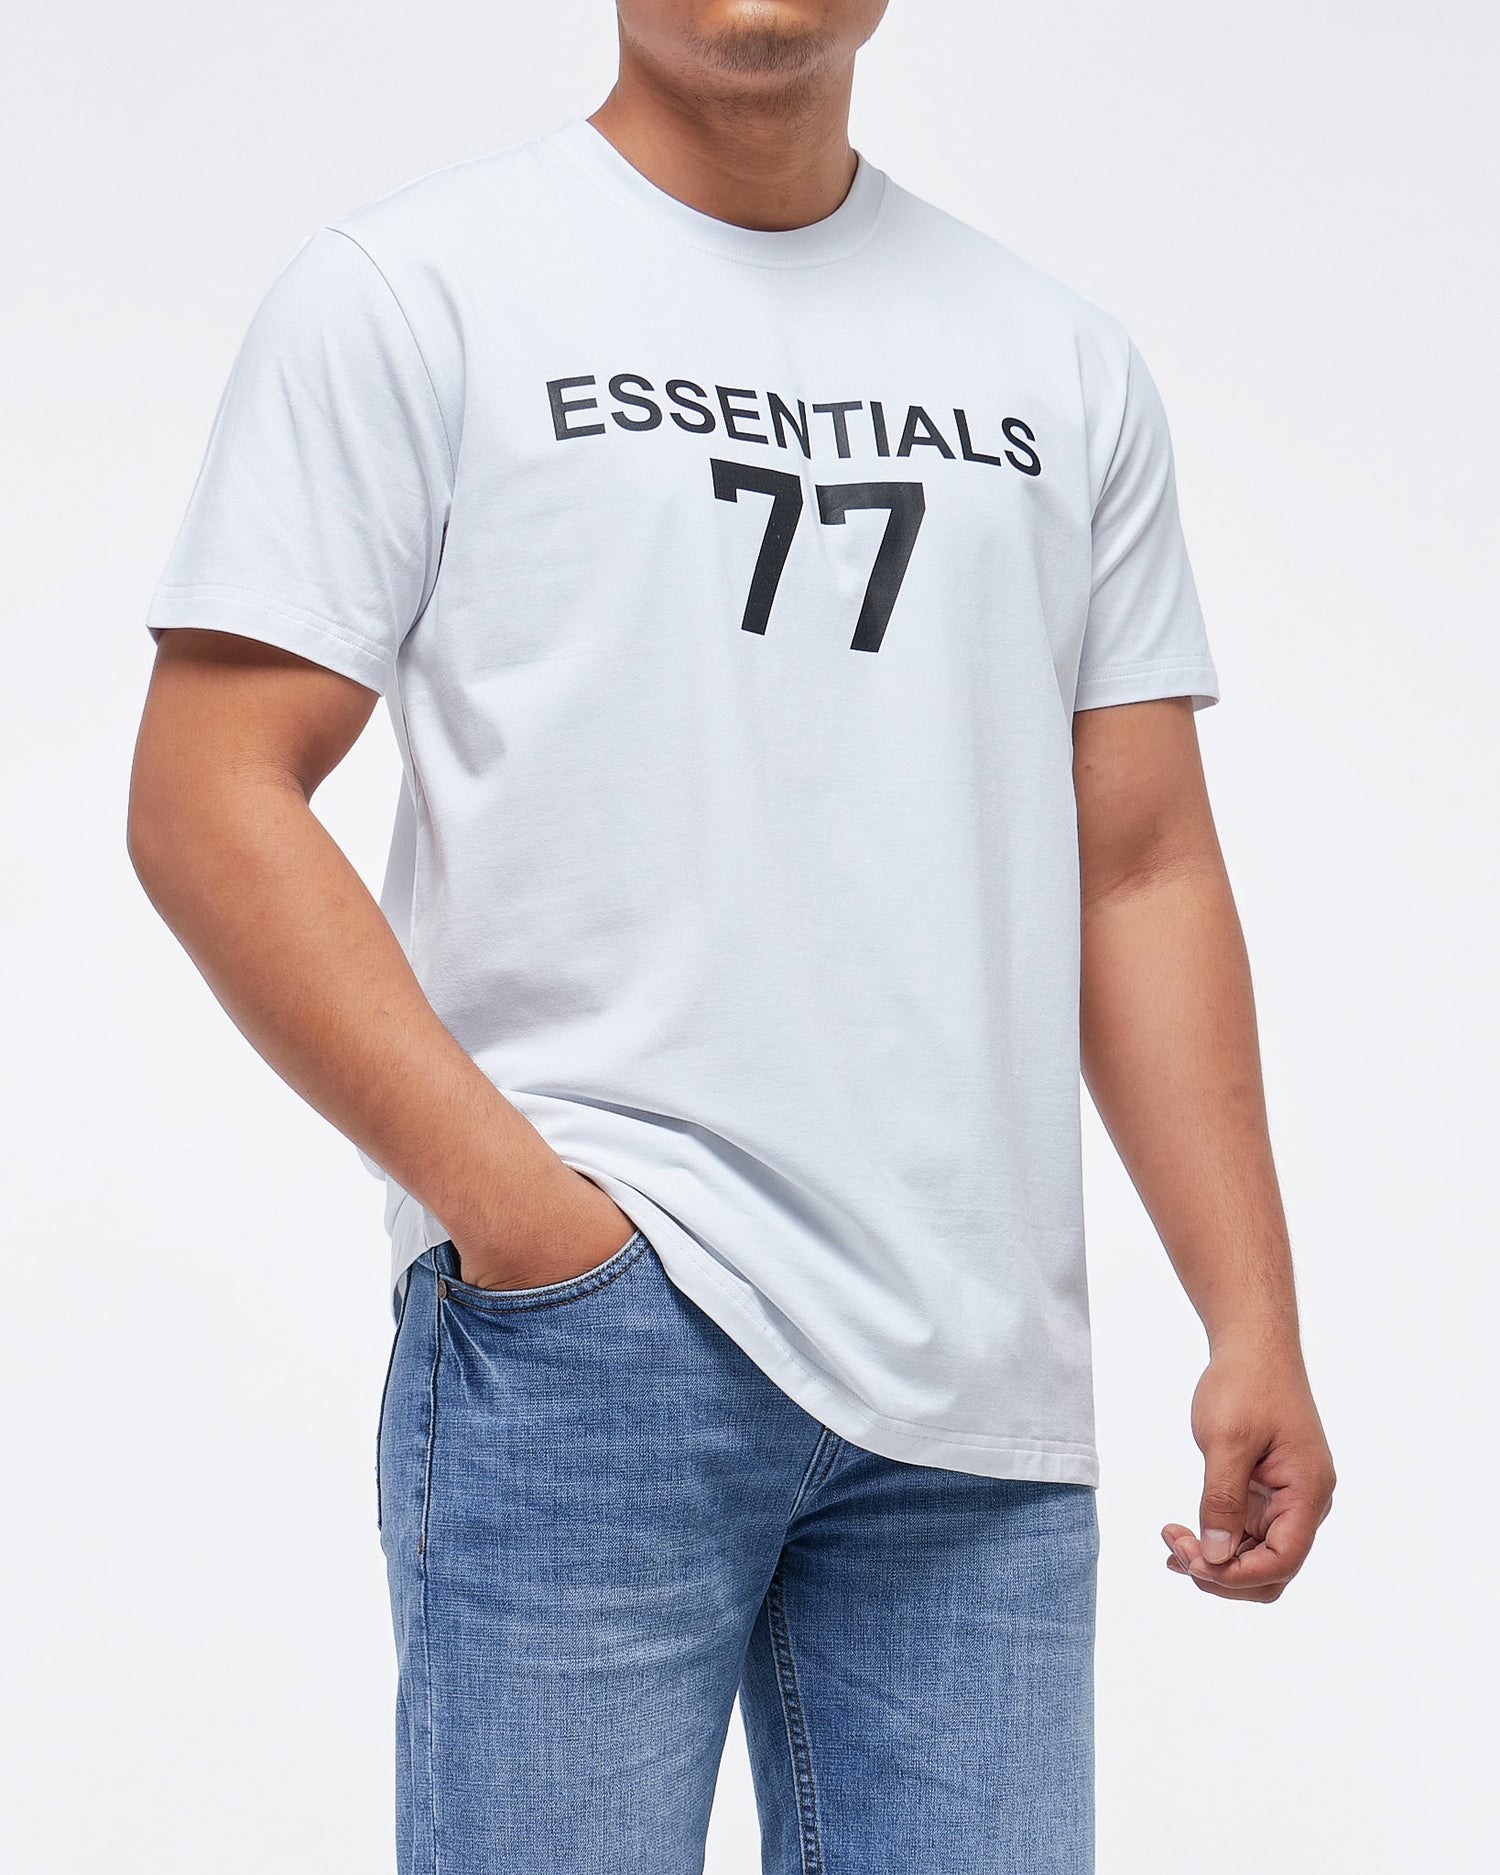 MOI OUTFIT-Essentials 77 Printed Men T-Shirt 14.50